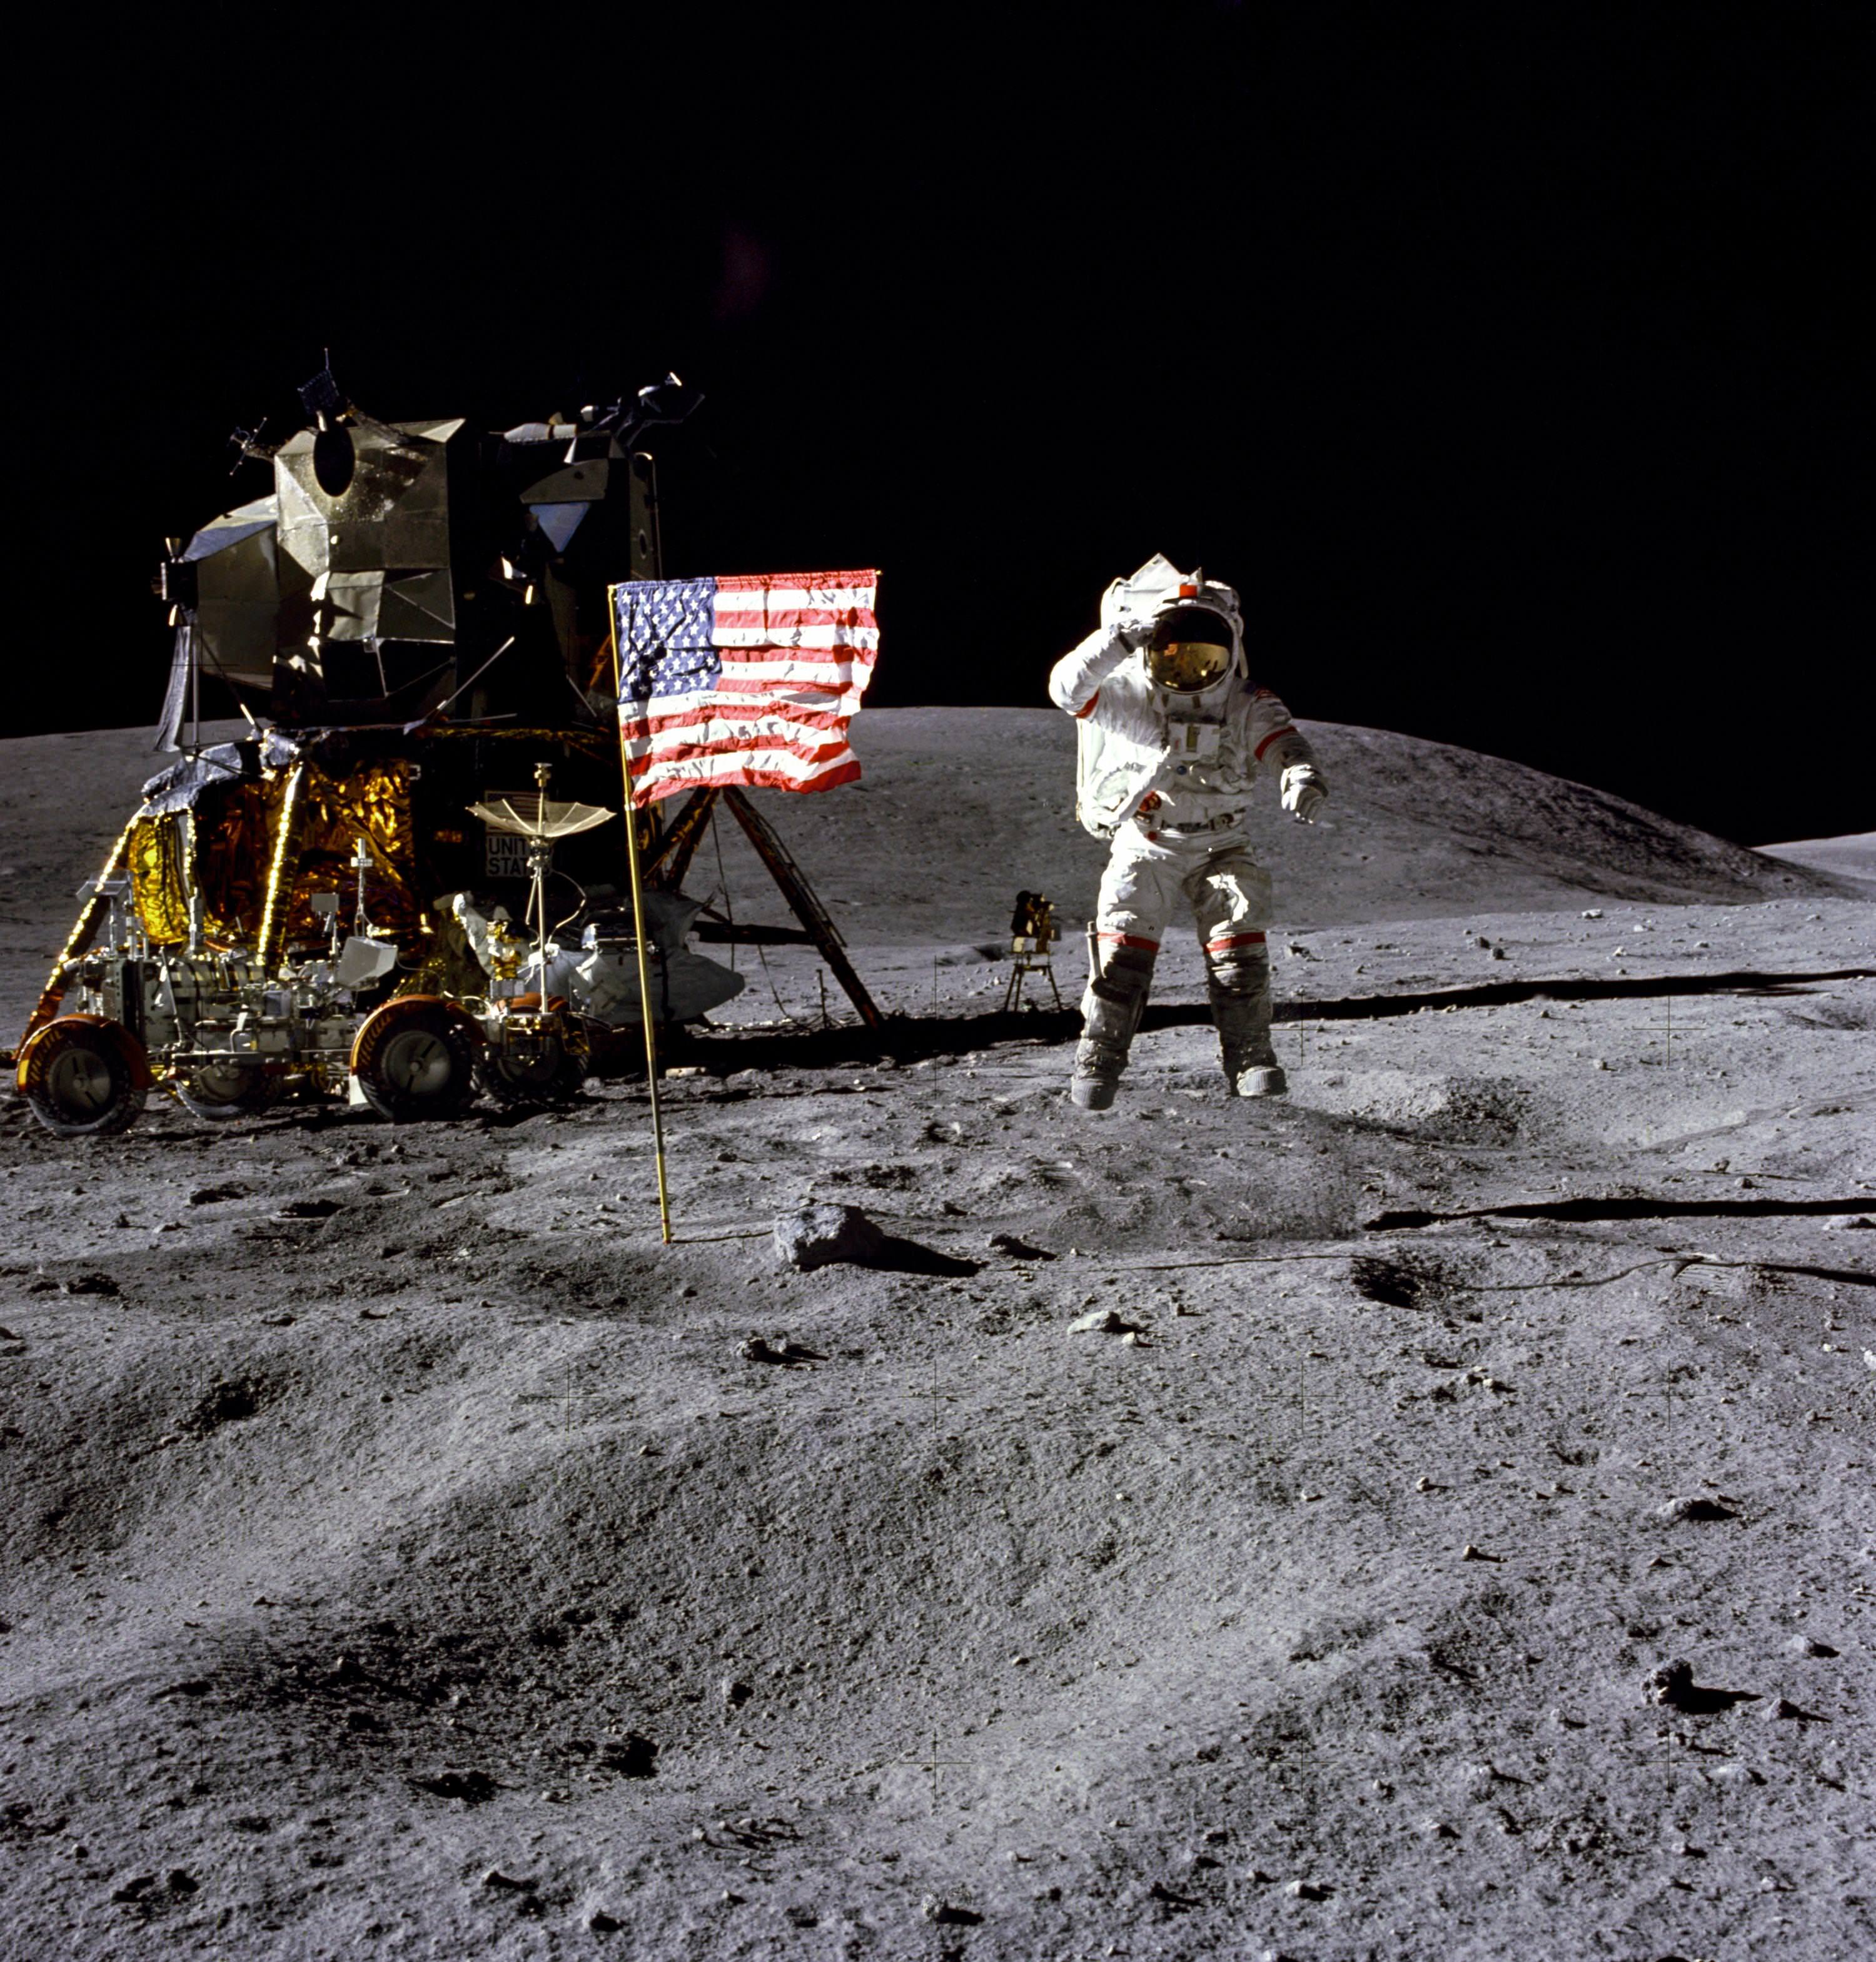 John Young, astronaut and Navy veteran, salutes the U.S. flag at the Descartes landing site during the first Apollo 16 extravehicular activity on April 22, 1972. Credit: NASA, Charles M. Duke Jr.